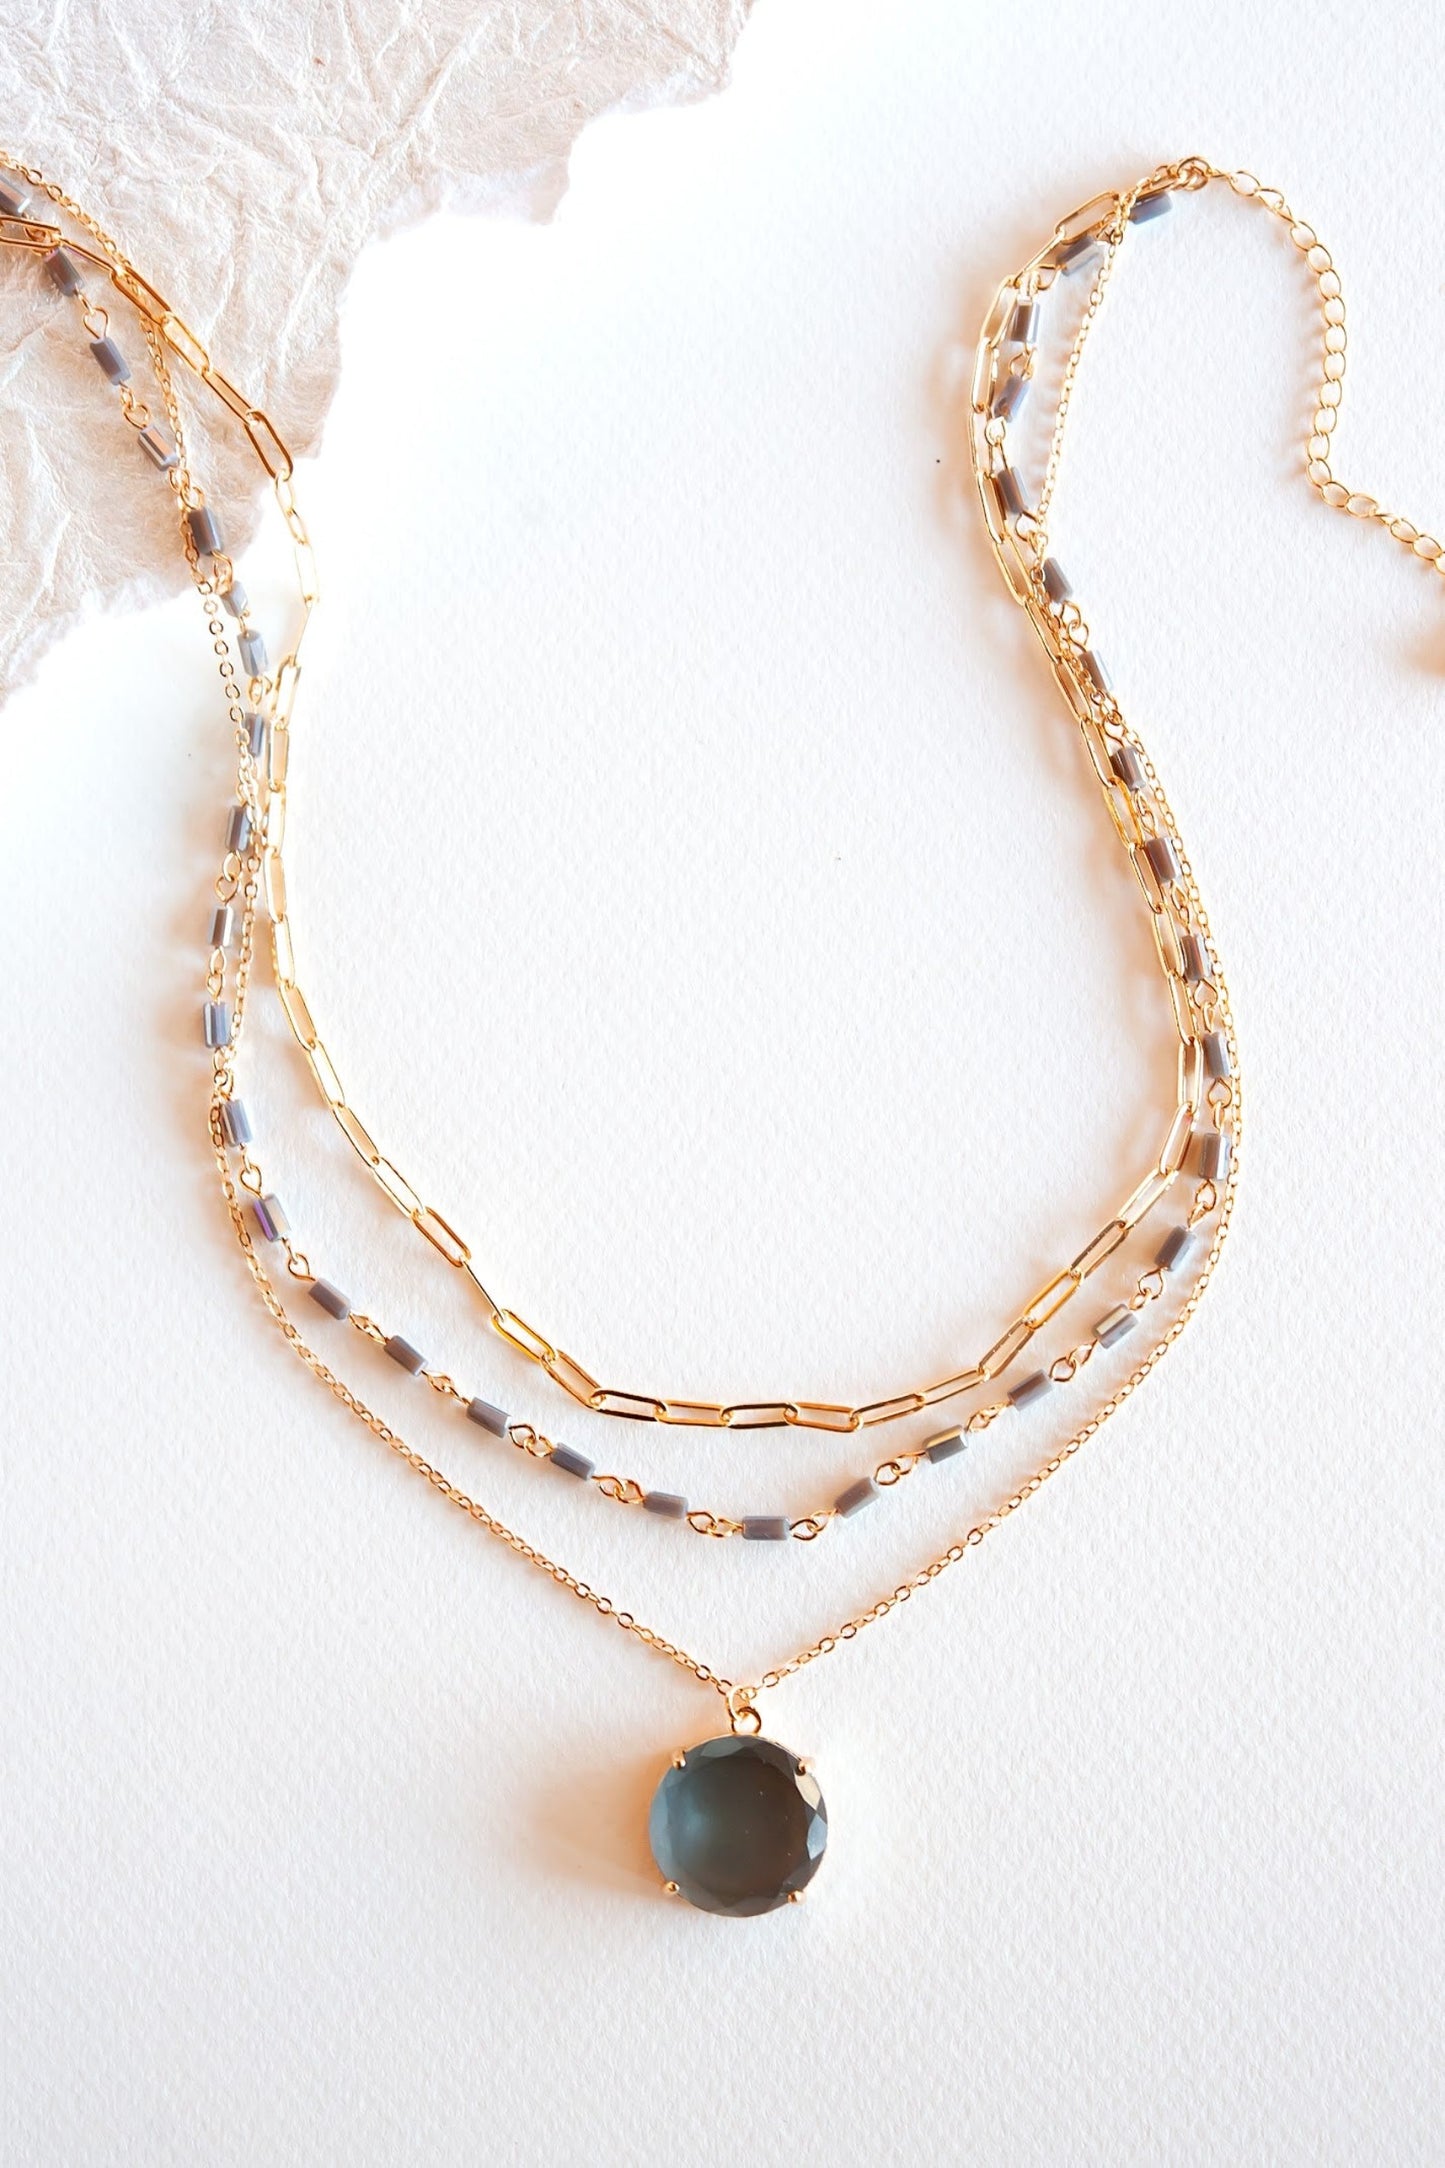 Mary Layering Necklace | Gold Chain and Round Crystal Accent Stone | Elegant Crystal Pendant and Gold Chain Necklace